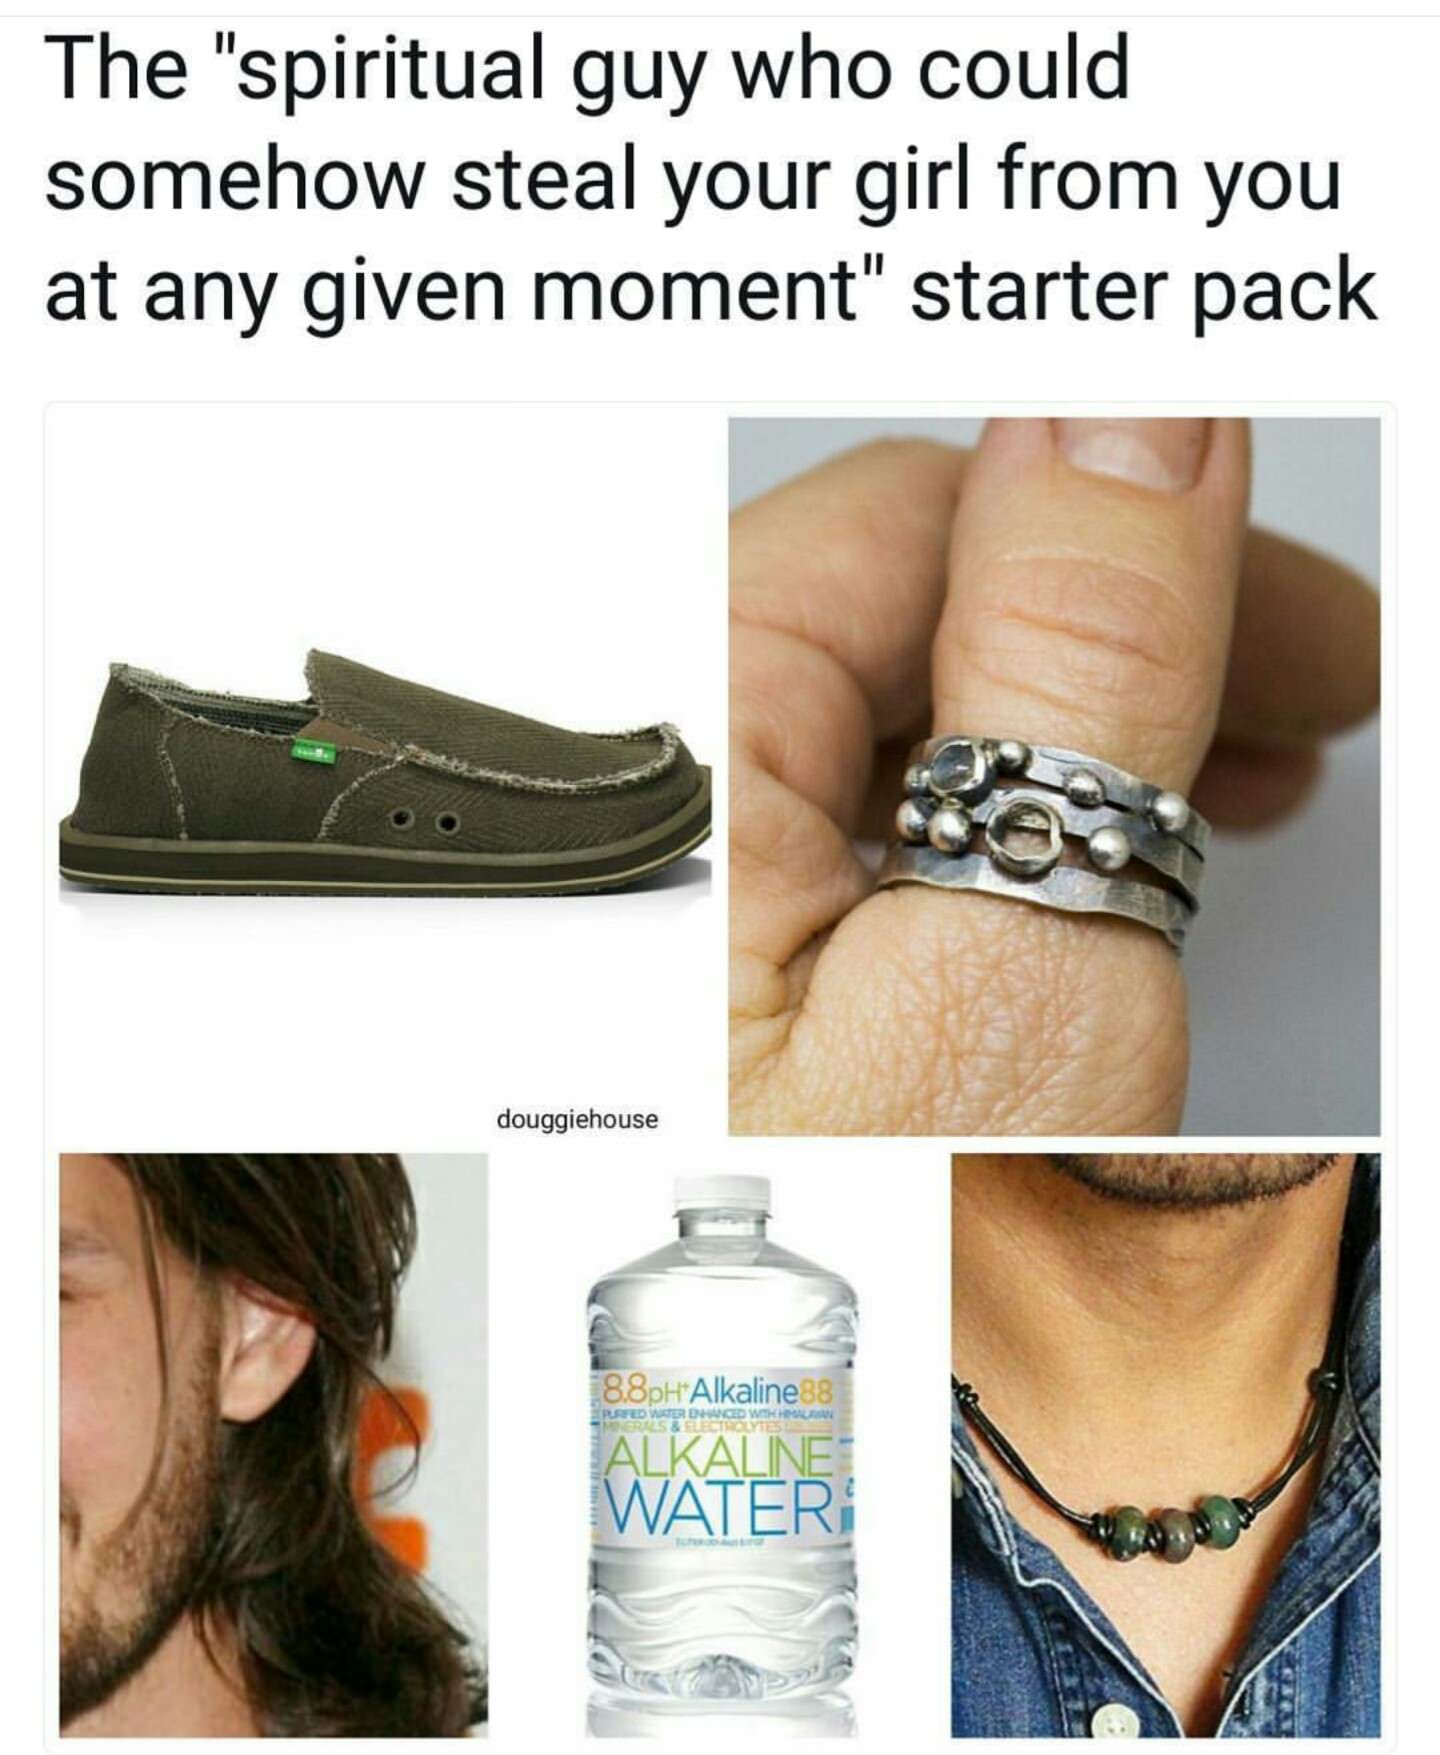 starter pack - spiritual guy meme - The "spiritual guy who could somehow steal your girl from you at any given moment" starter pack douggiehouse 8.8pH"Alkaline 88 Errewed Kile Alkaline Water